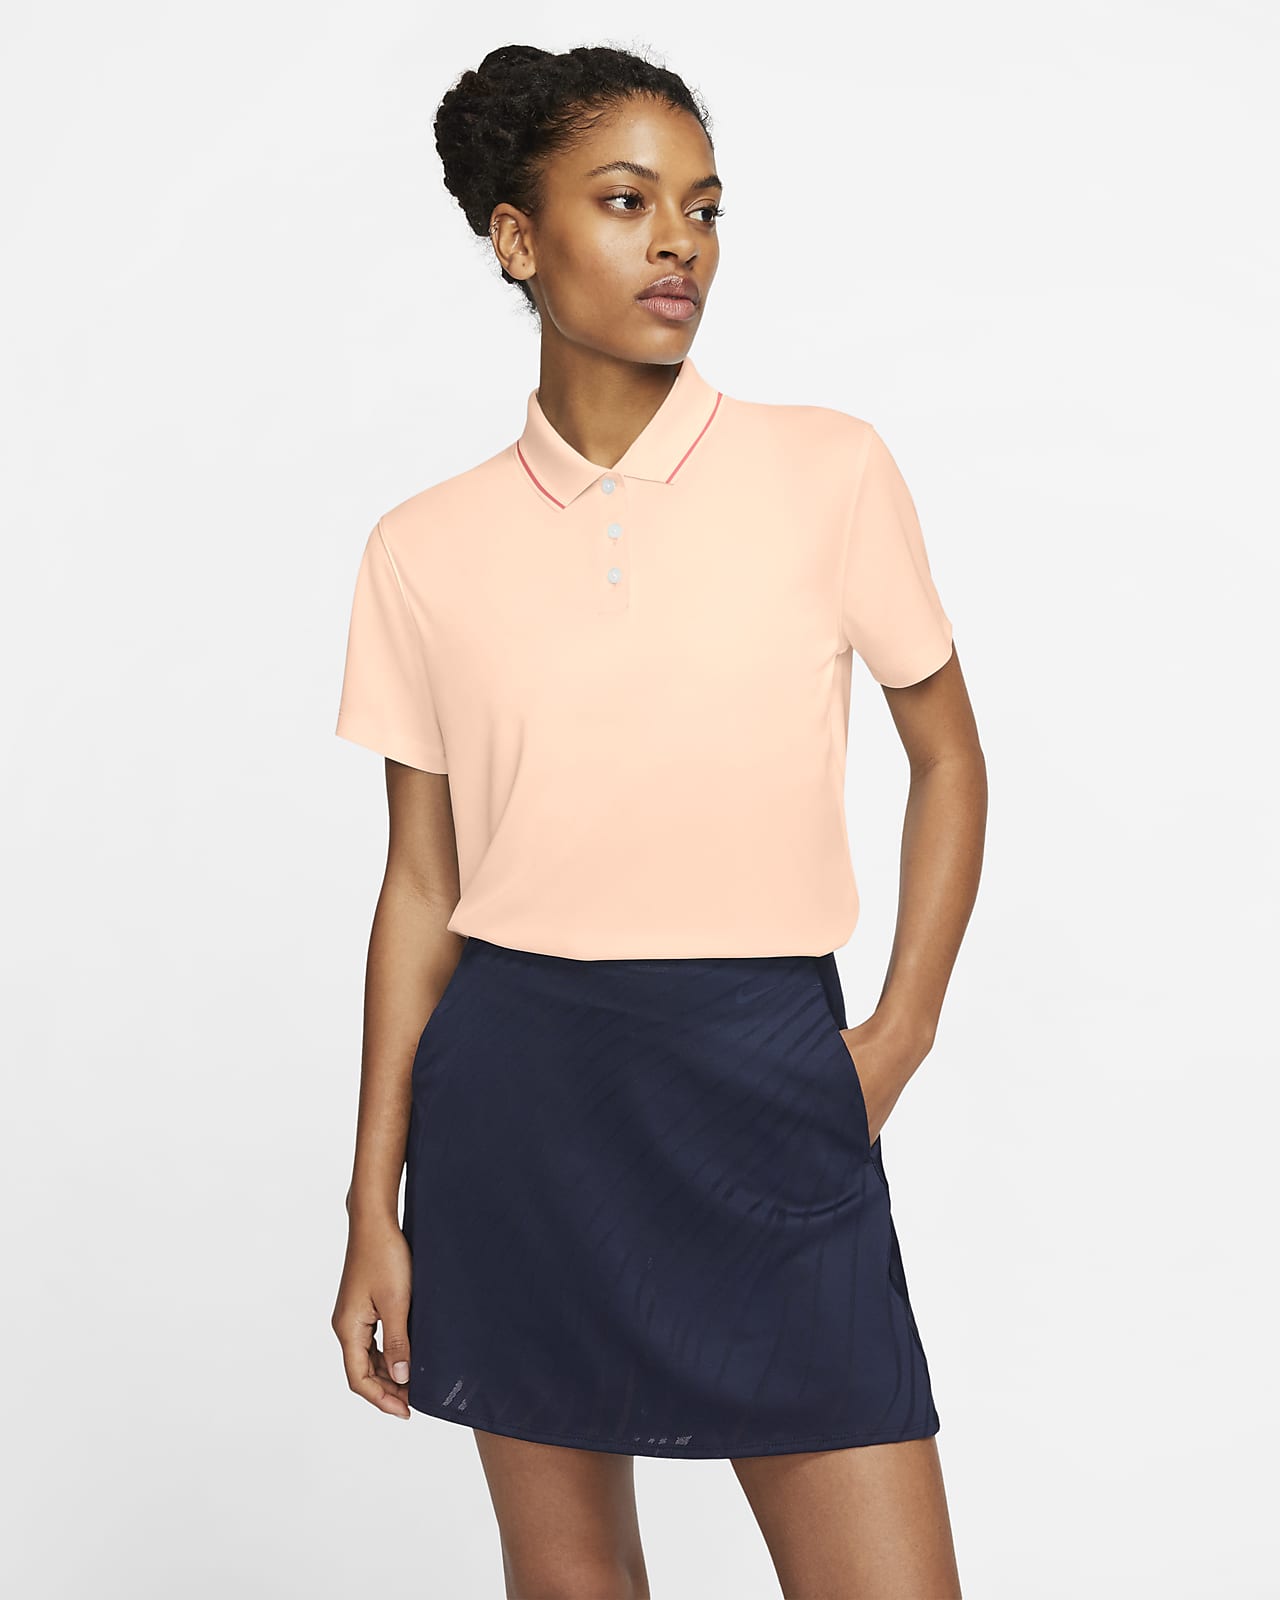 Buy > women's loose fit golf shirts > in stock